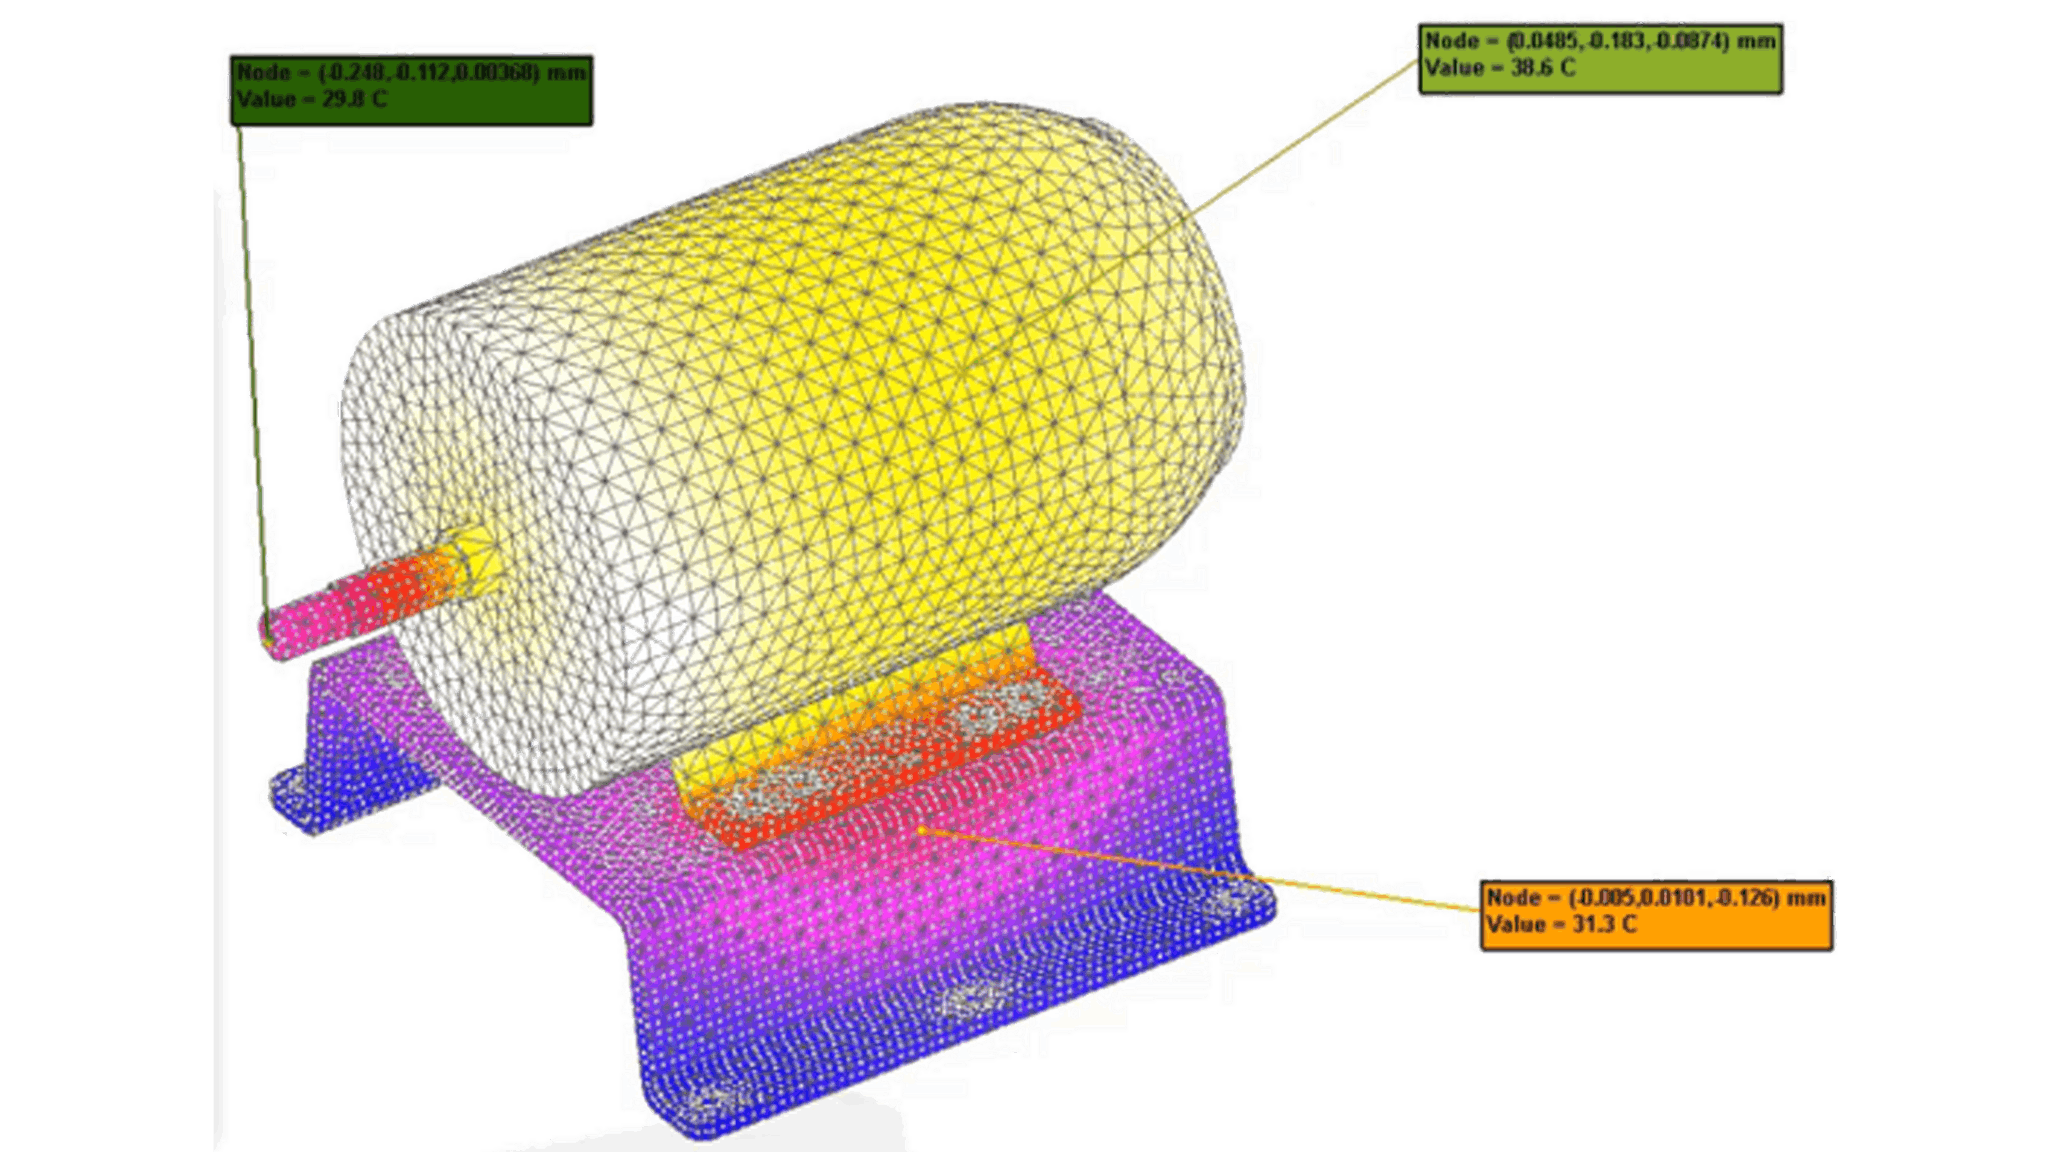 Importance of associating simulation with CAD